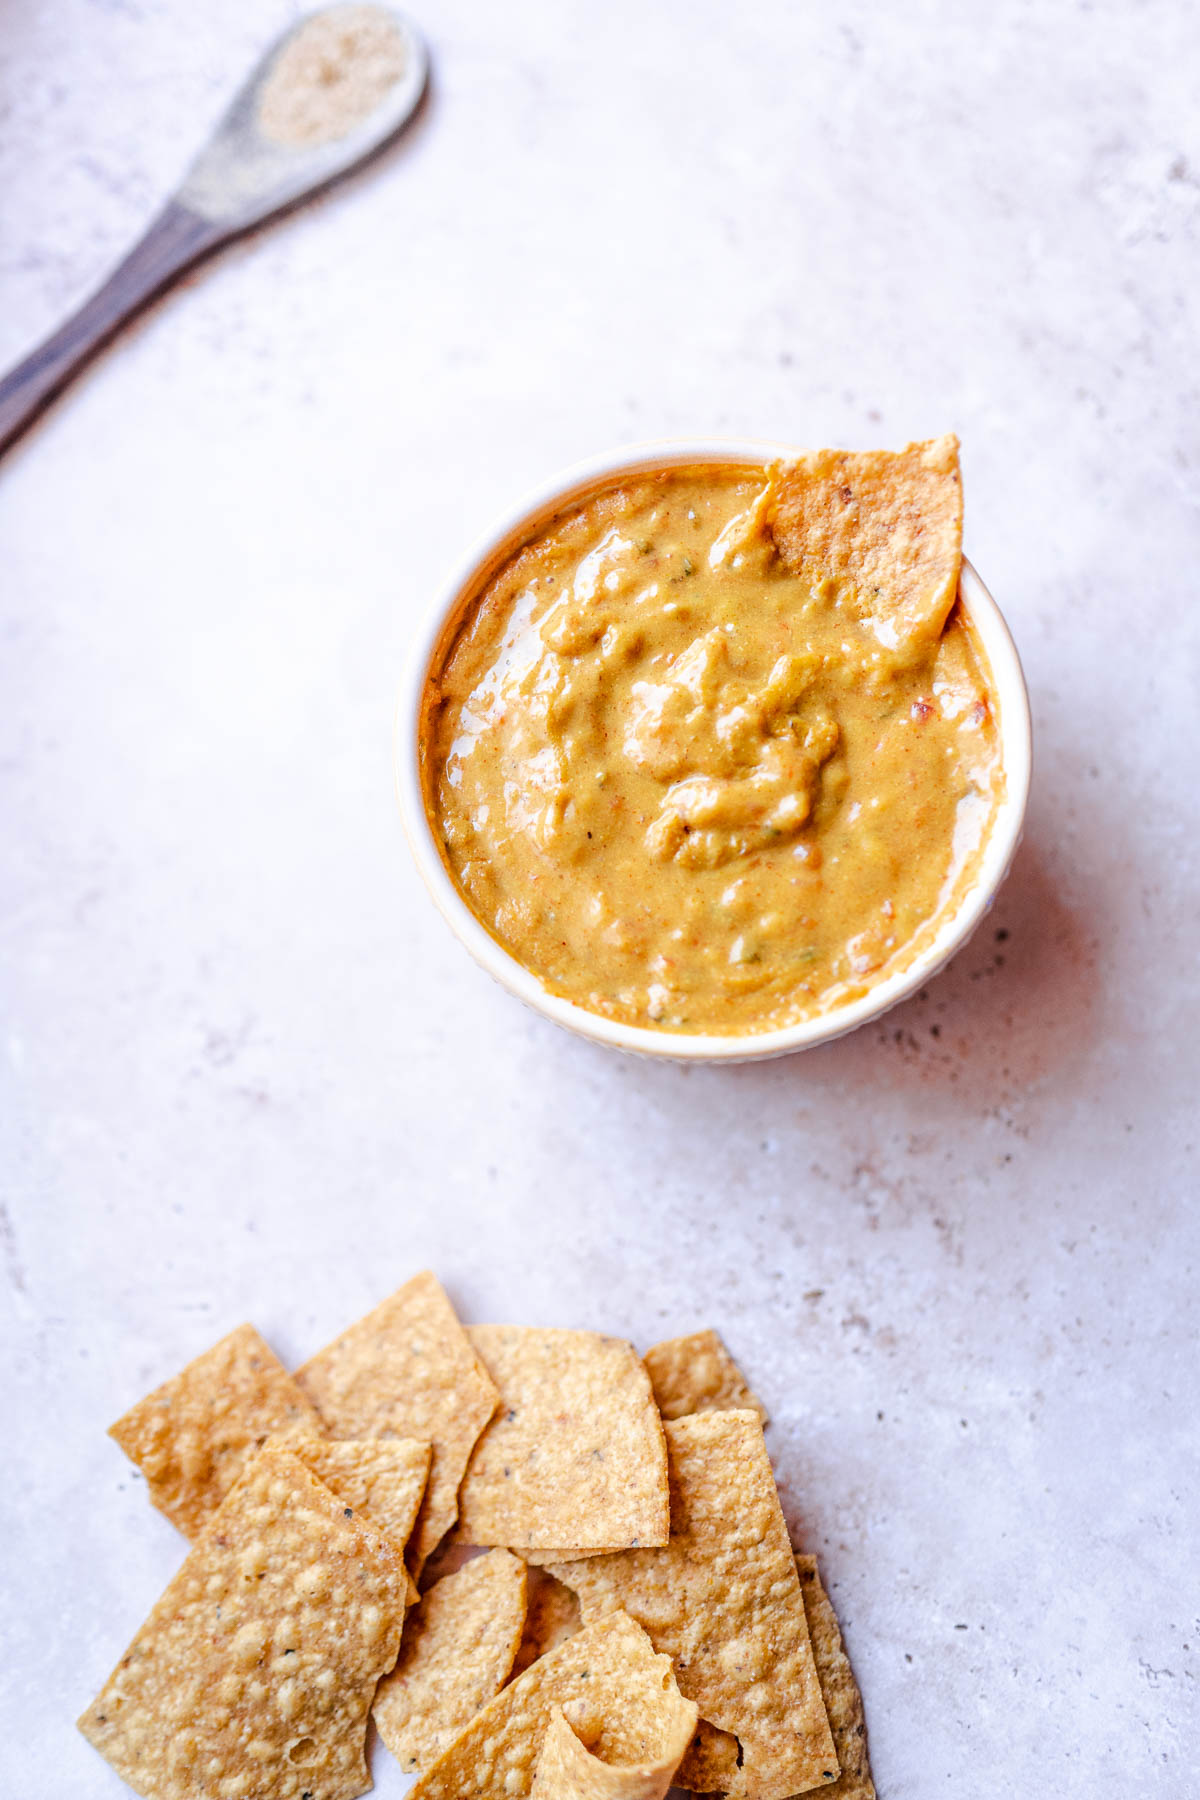 a tortilla chip stuck in an oil free vegan queso dip made with nutritional yeast.